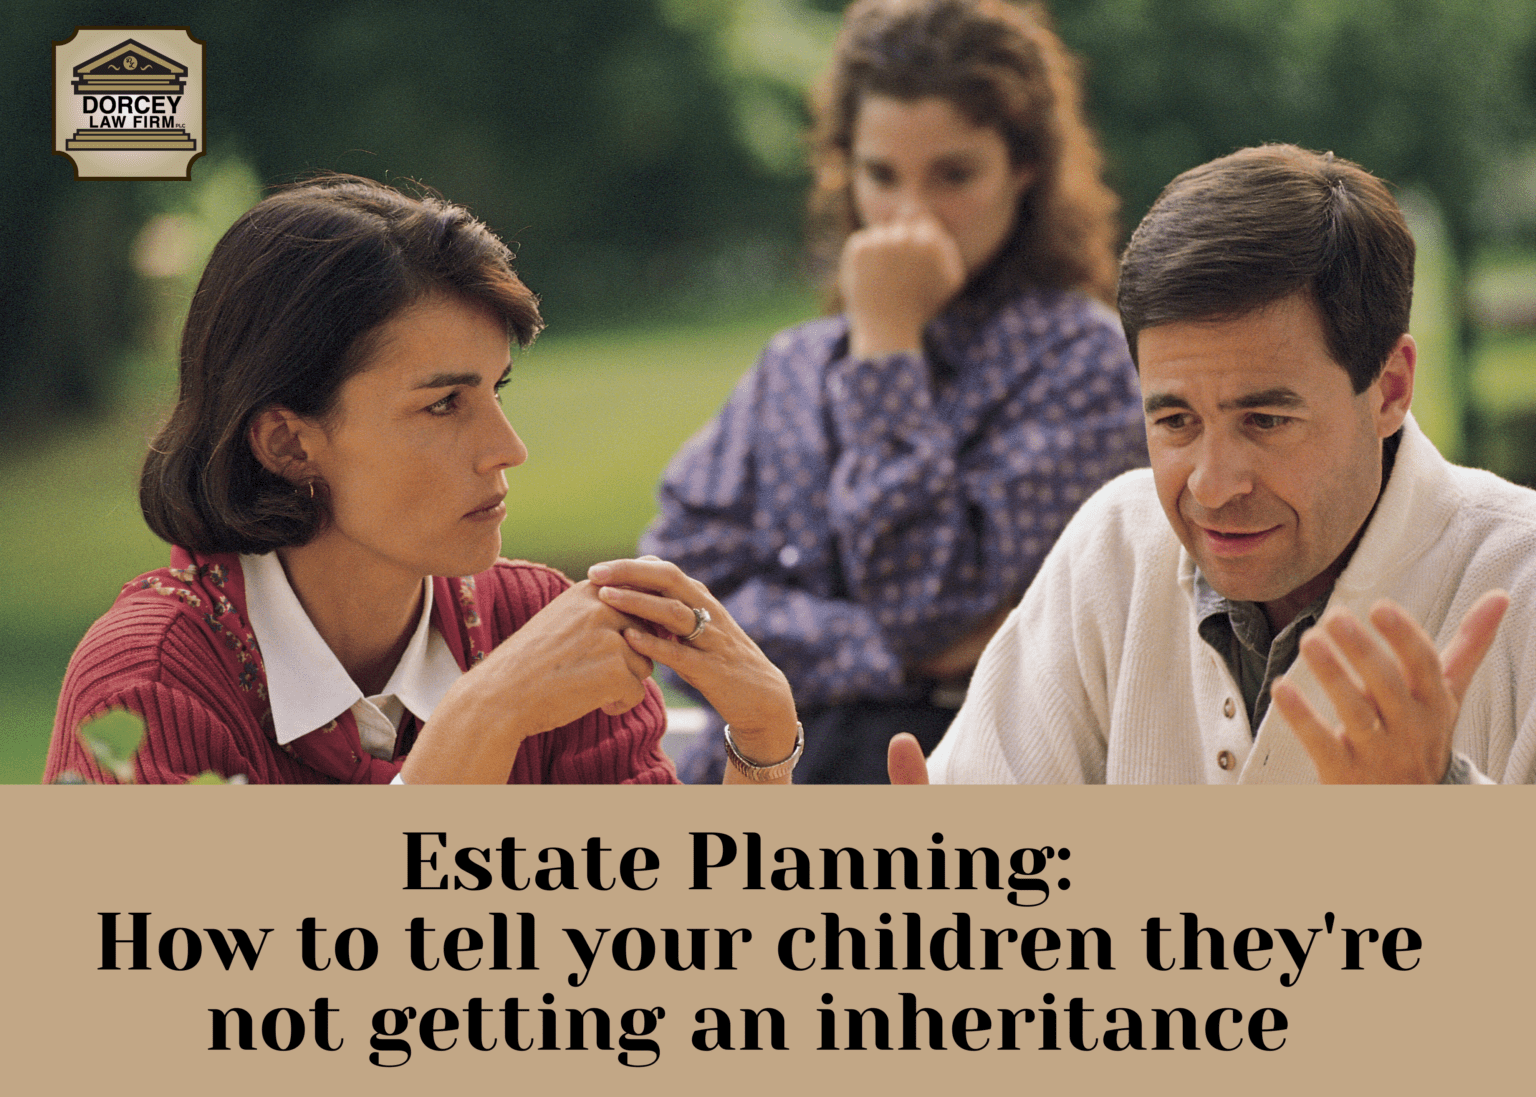 Estate Planning: How to Tell Your Children They’re Not Getting an Inheritance